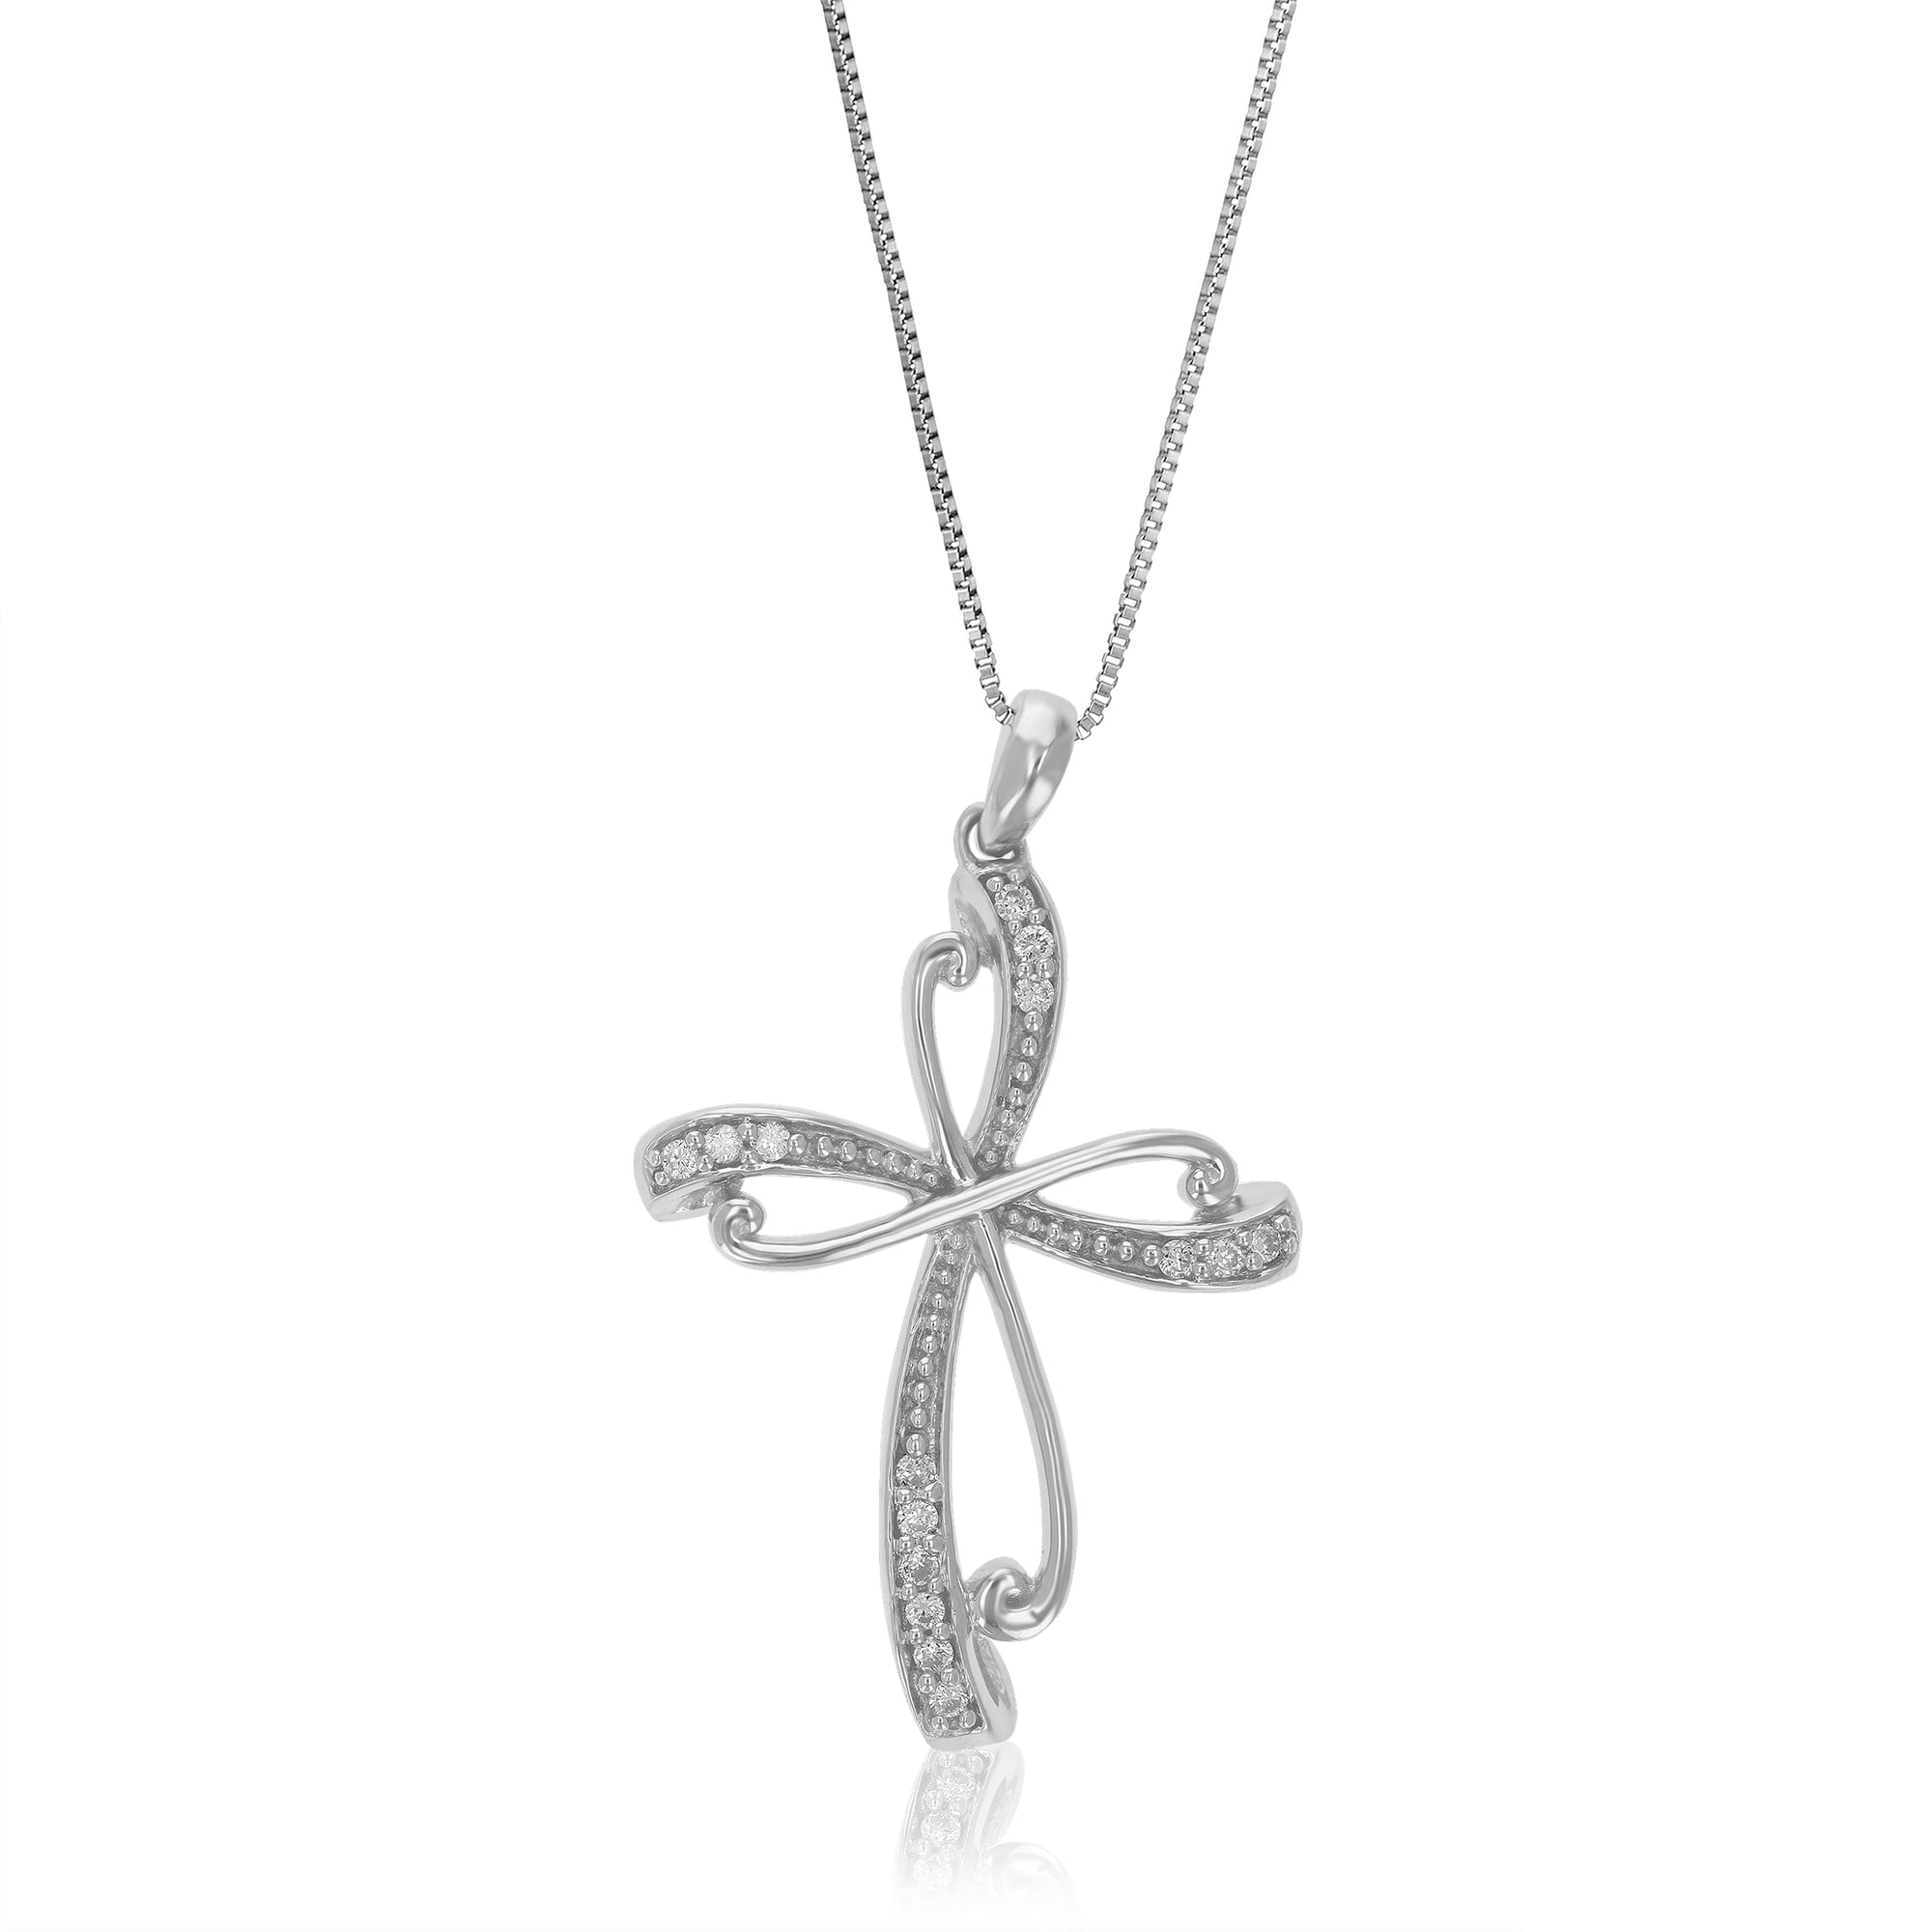 1/12 cttw Diamond Pendant Necklace for Women, Lab Grown Diamond Cross Pendant Necklace in .925 Sterling Silver with Chain, Size 1 Inch